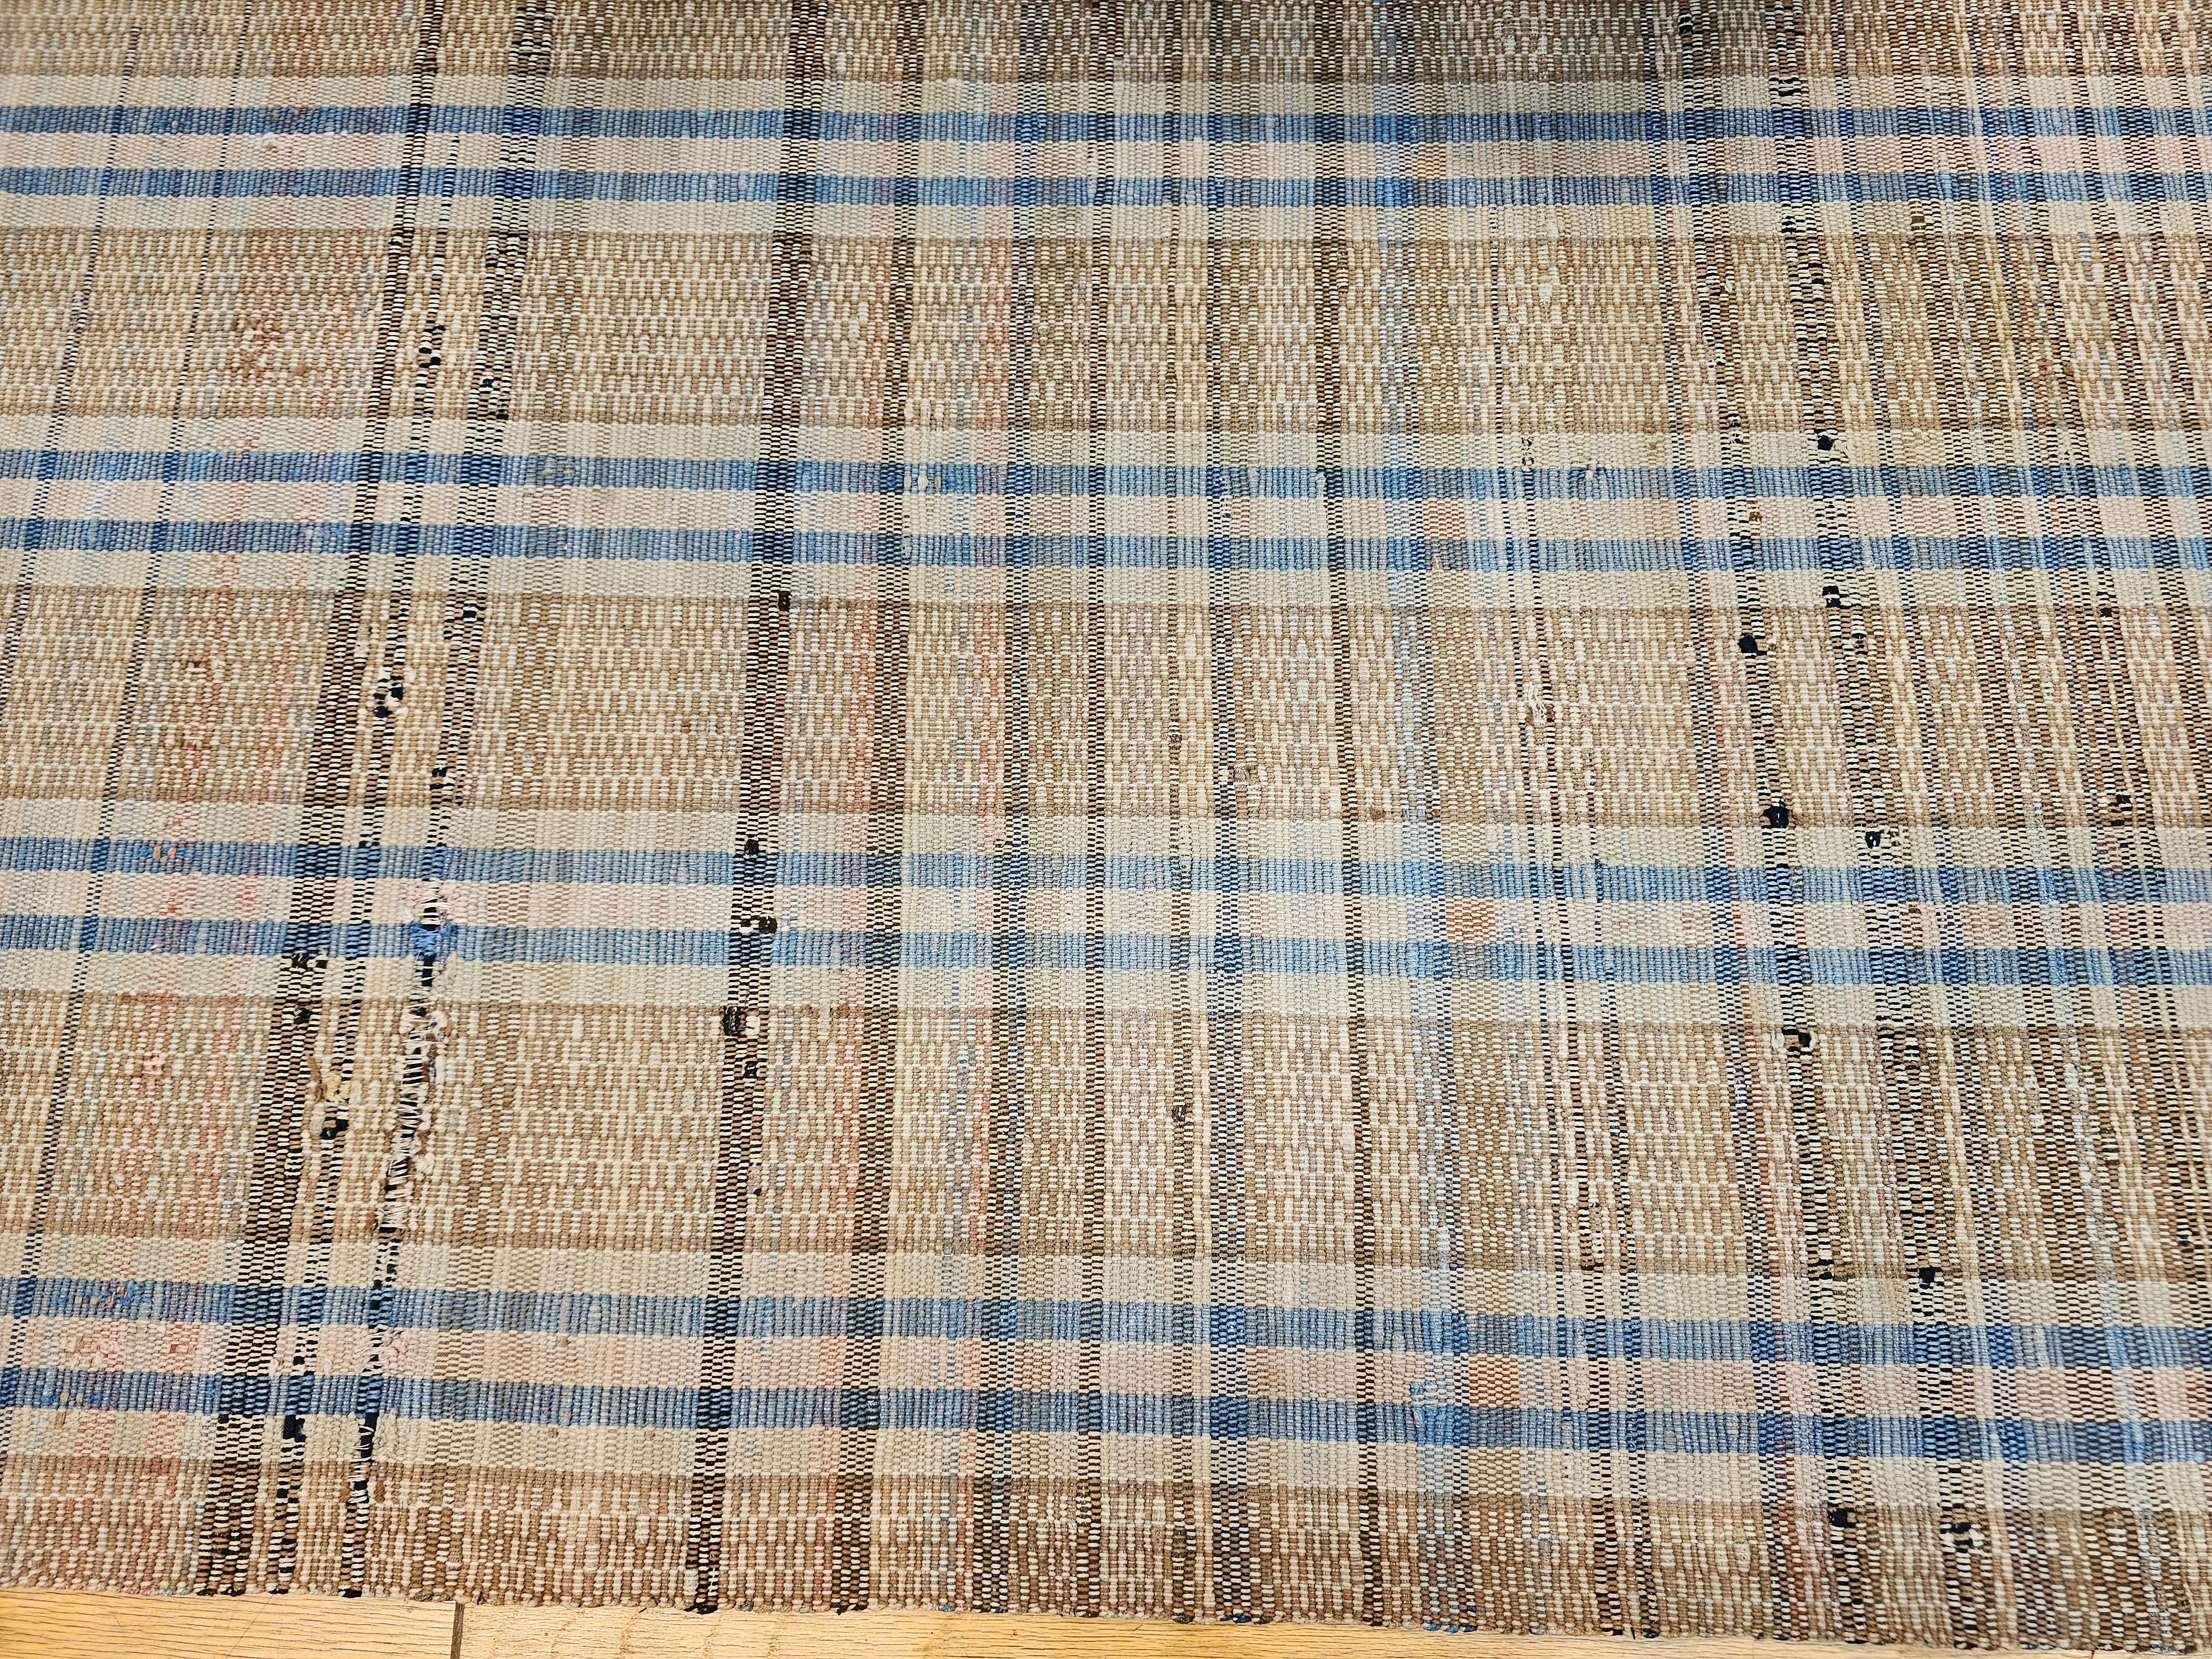 Vintage Hand-Woven American Amish Rag Runner in Pale Blue, Pink, Wheat, Caramel For Sale 4